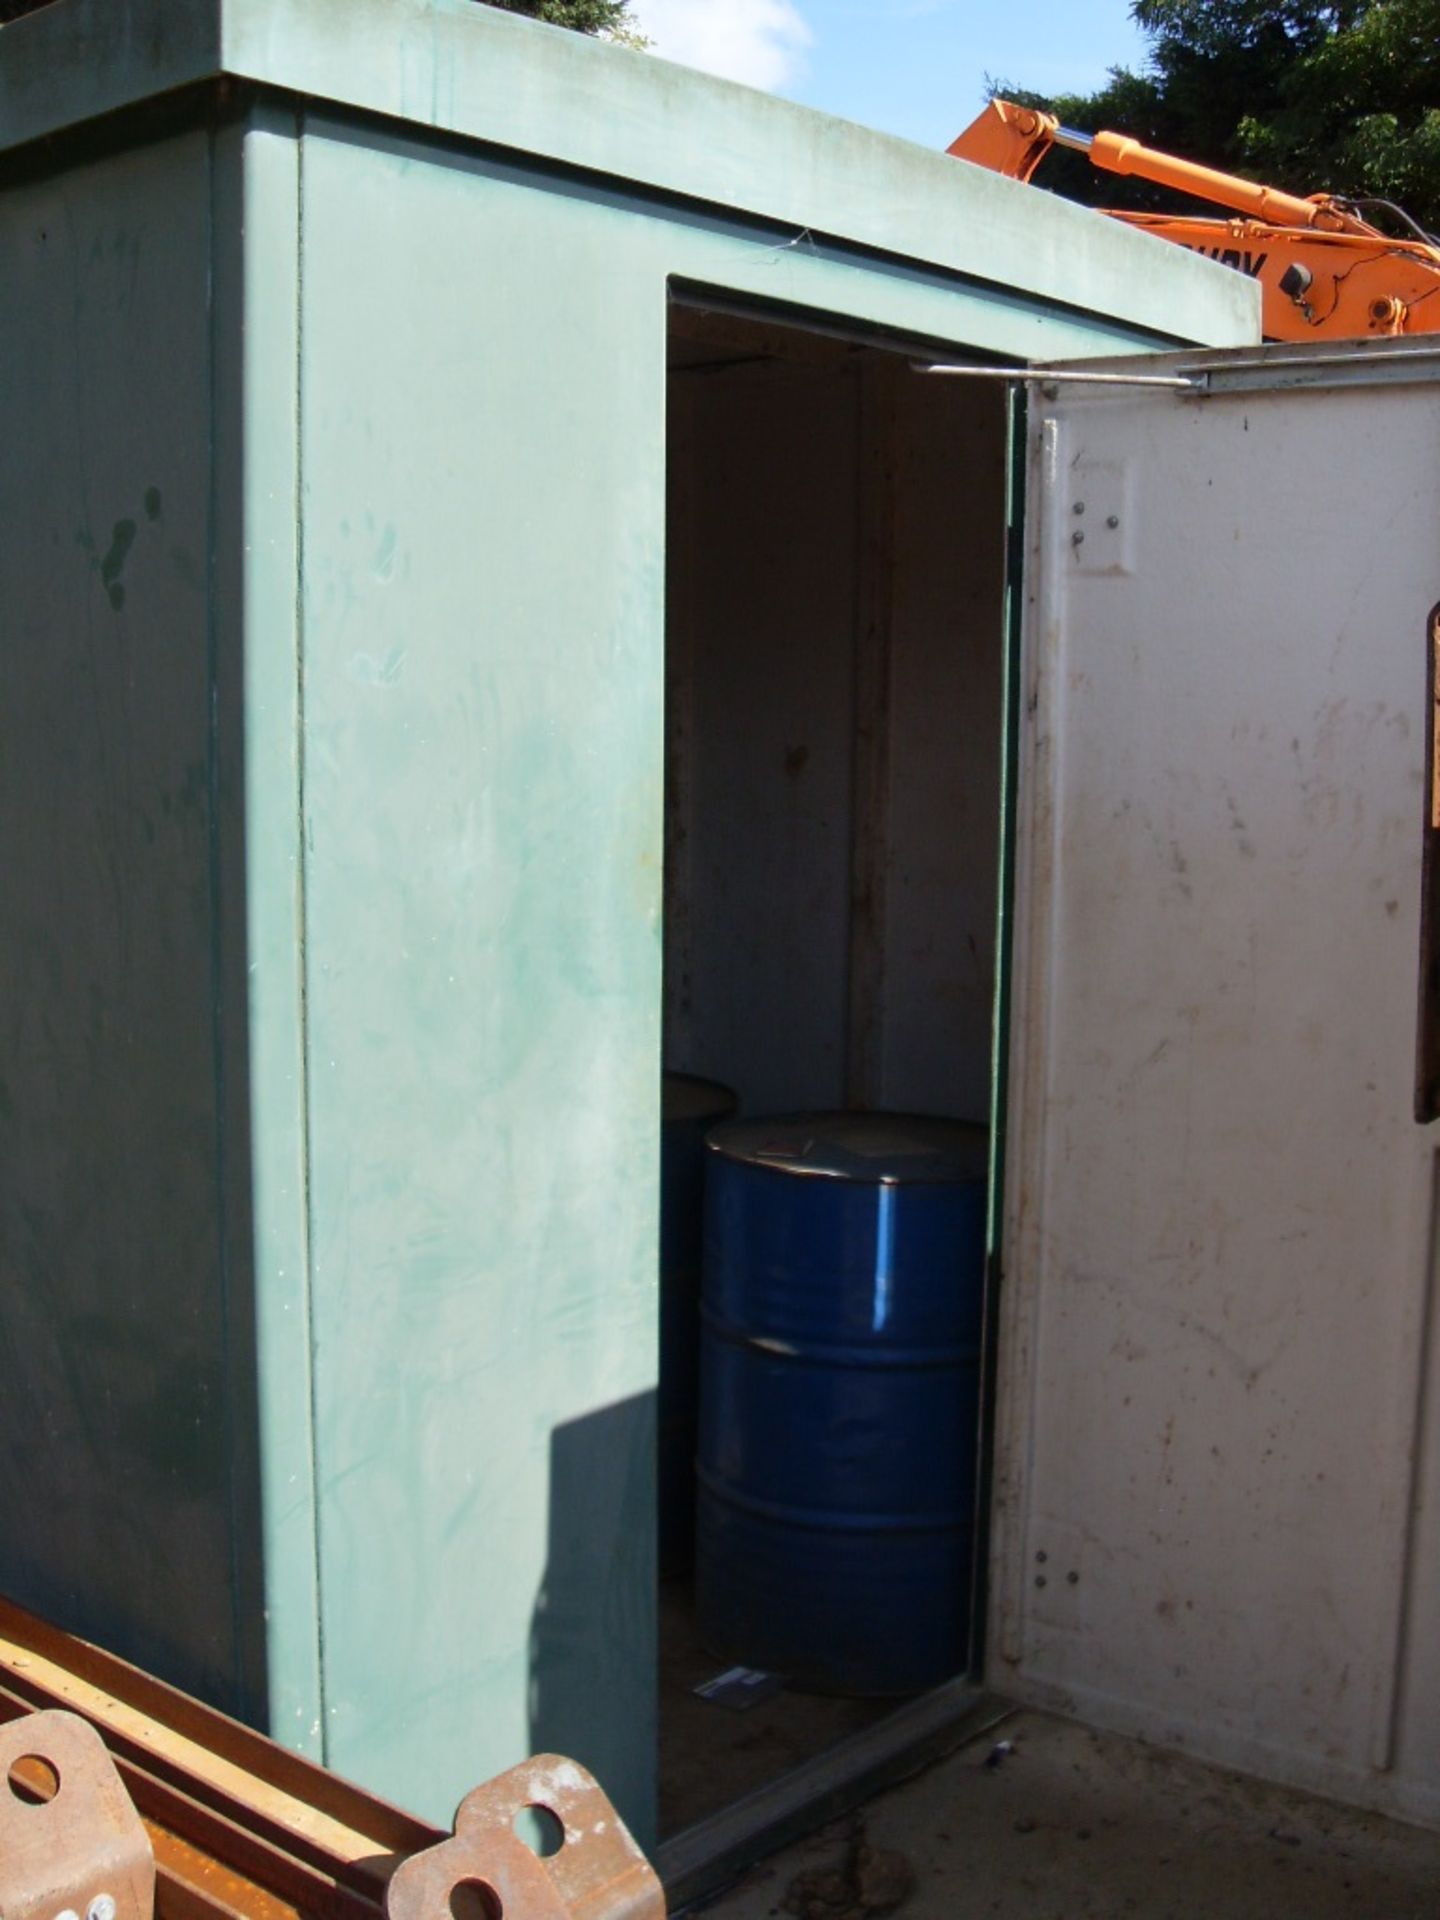 Sectional building suitable for pump / electrical useage, or similar - Image 3 of 6